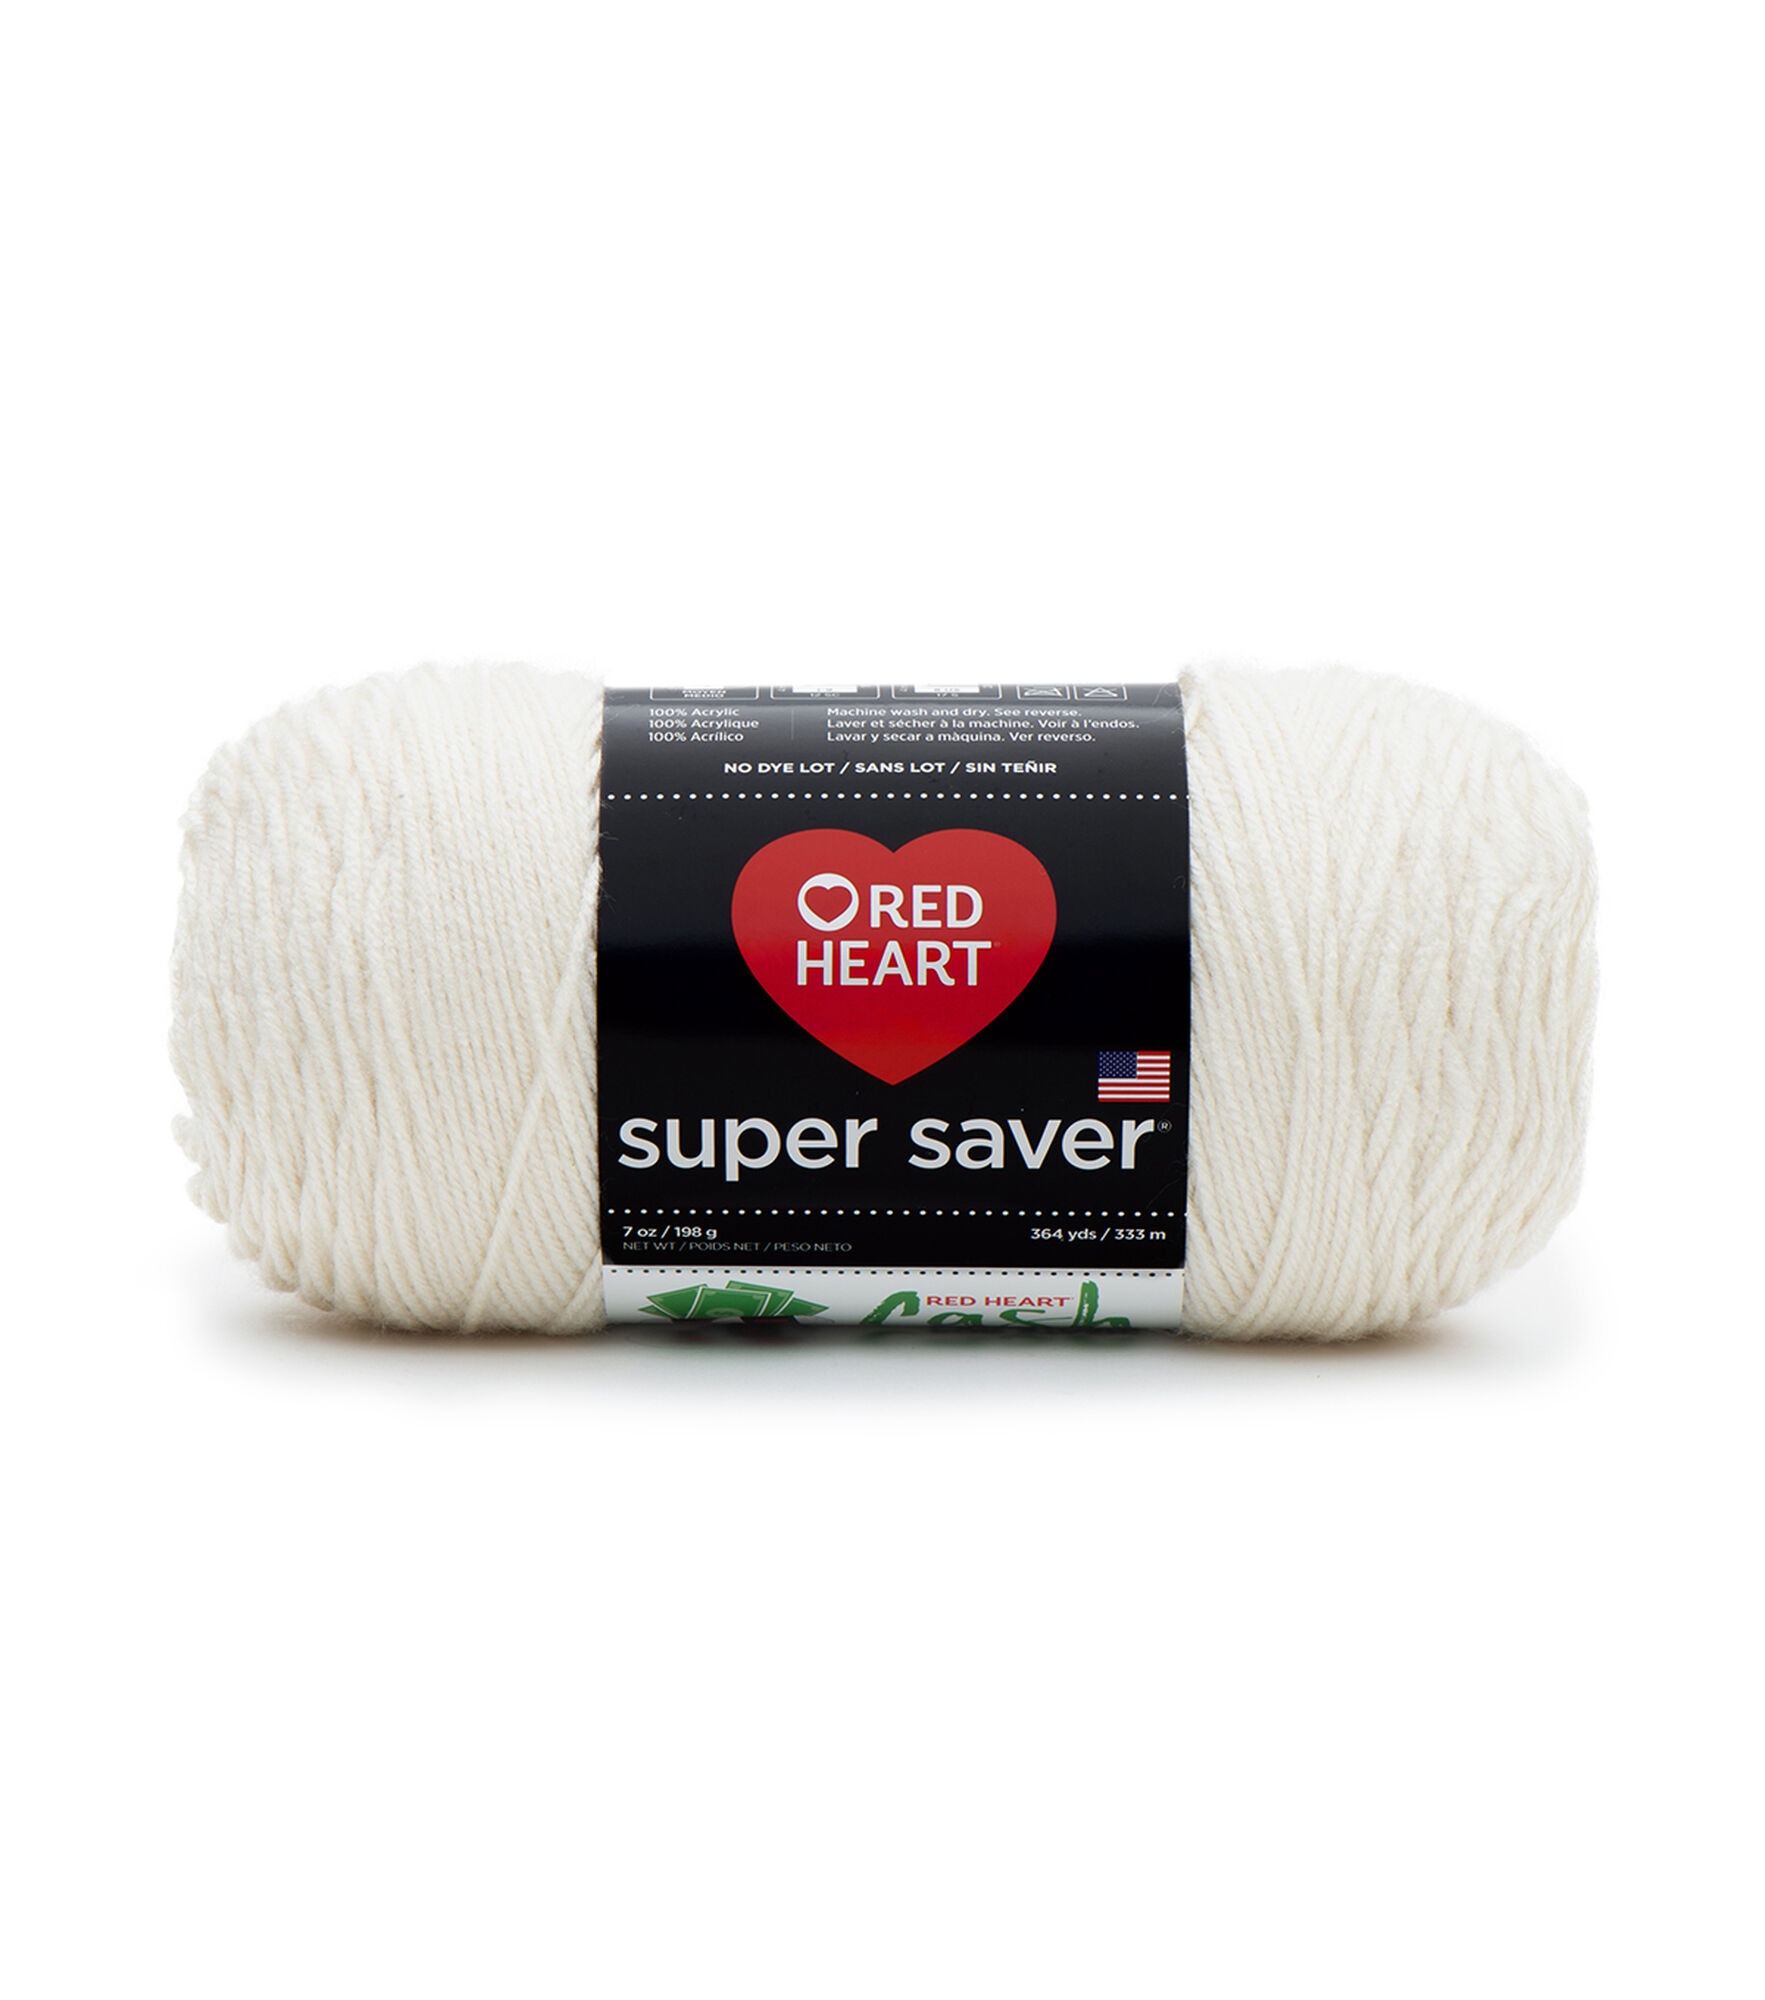 12 Pack: Value Solid Yarn by Craft Smart, Size: 7, Beige